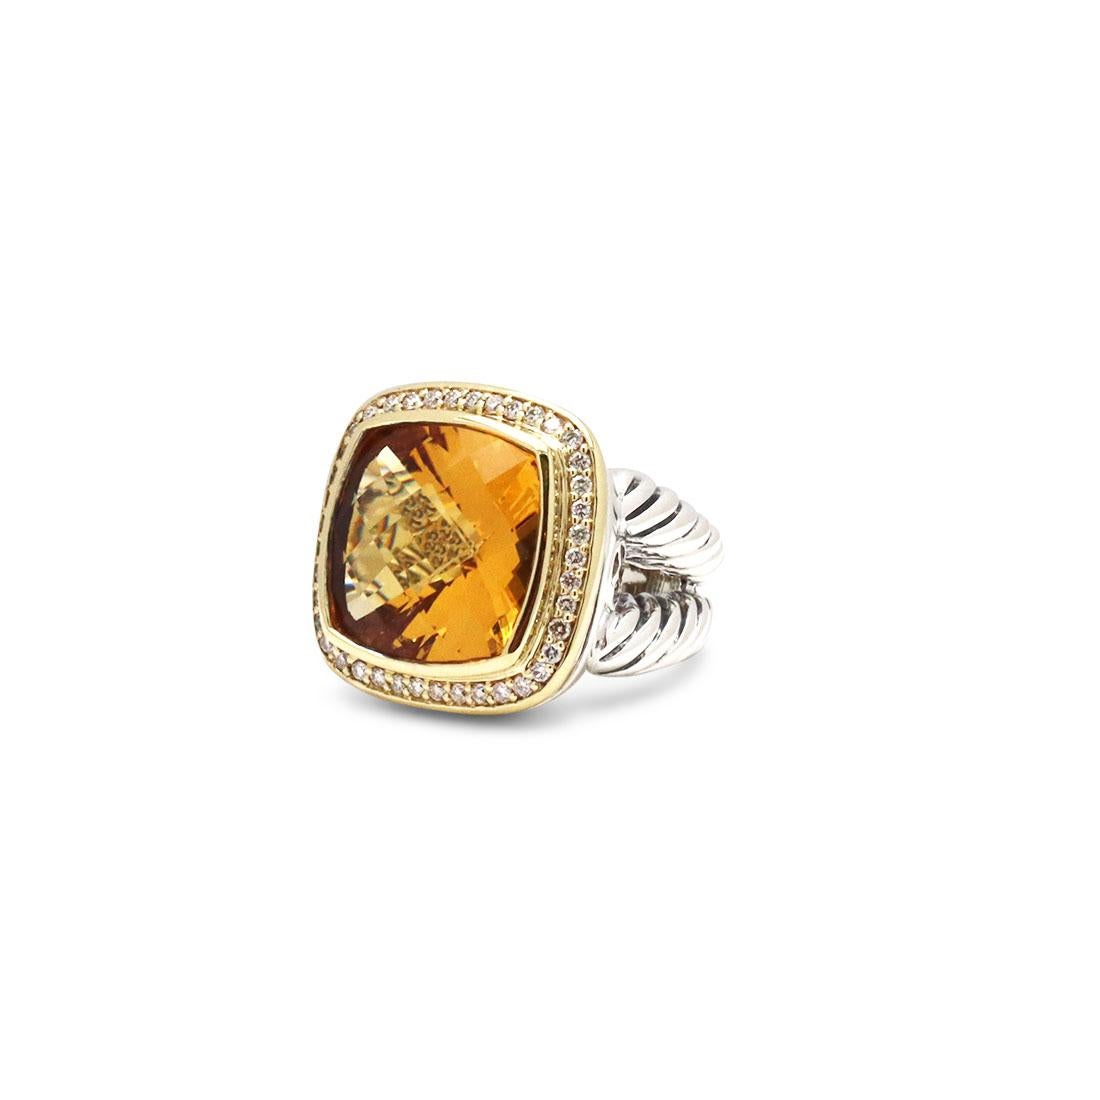 Authentic David Yurman Albion ring crafted in 18 karat yellow gold and sterling silver. This ring features a cushion cut faceted citrine stone. The ring is set with approximately 0.40 carats of round brilliant cut diamonds. Signed DY, 925, 750. Ring